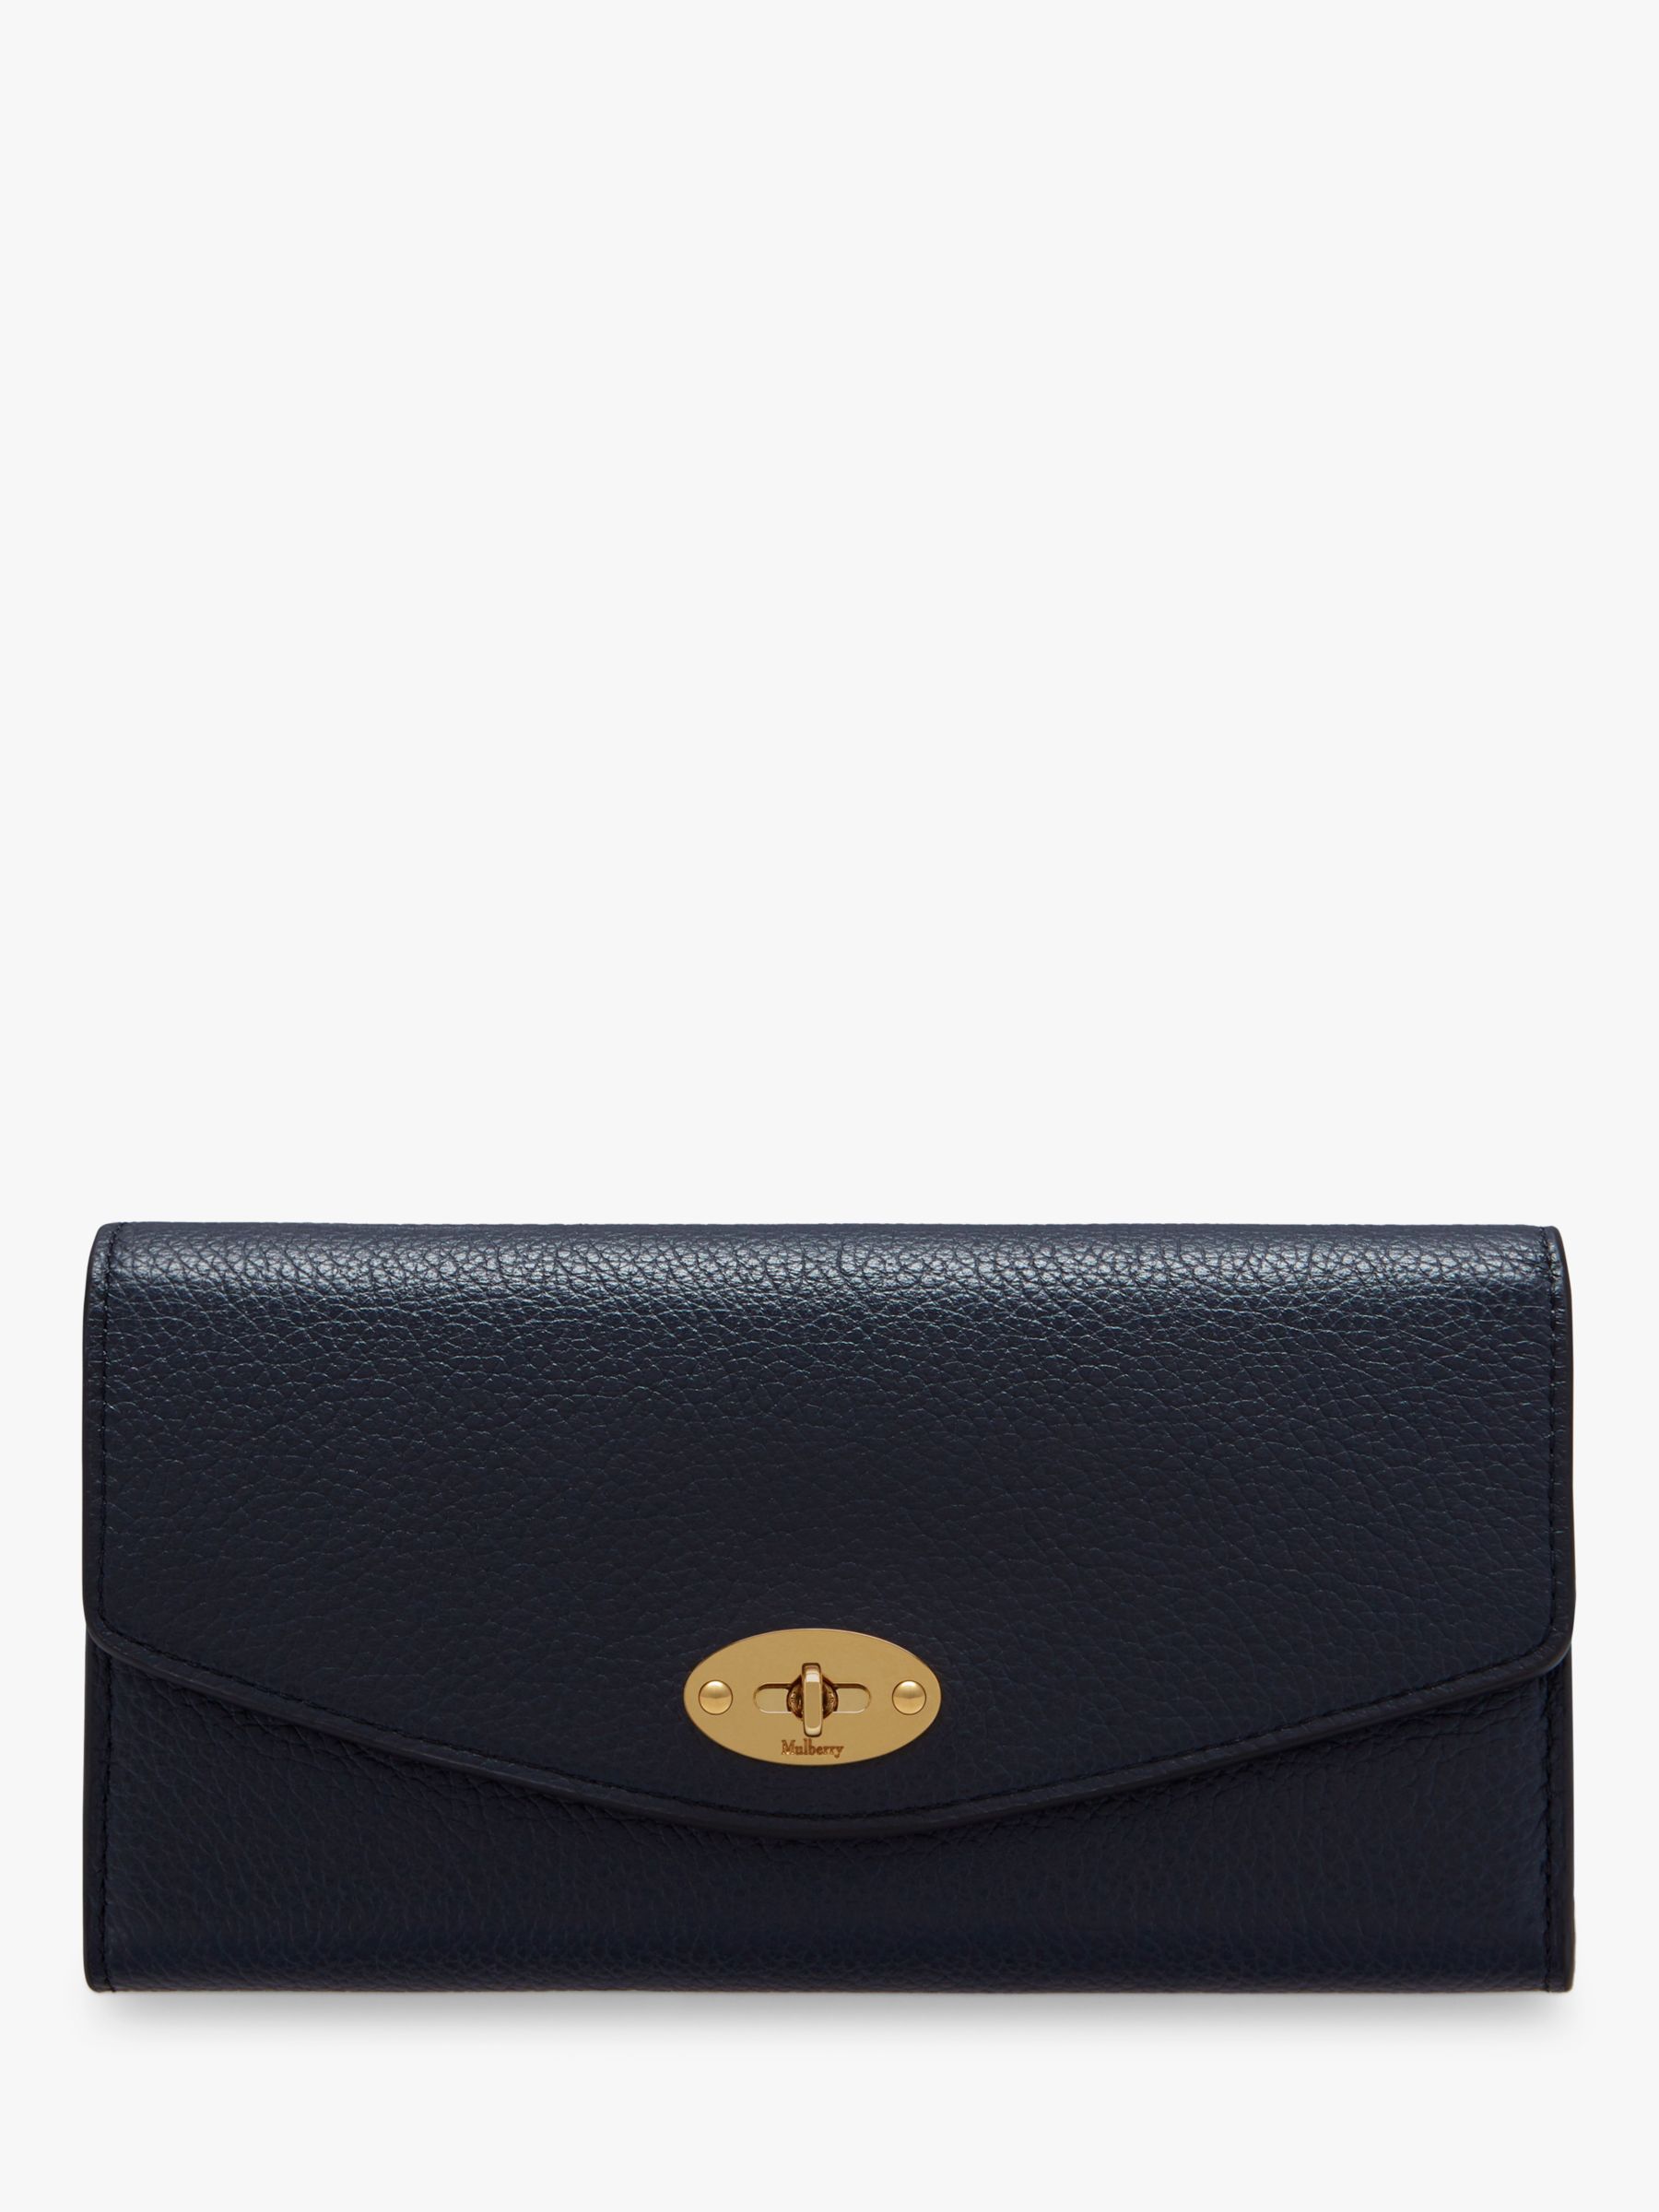 Mulberry Darley Small Classic Grain Leather Wallet at John Lewis & Partners